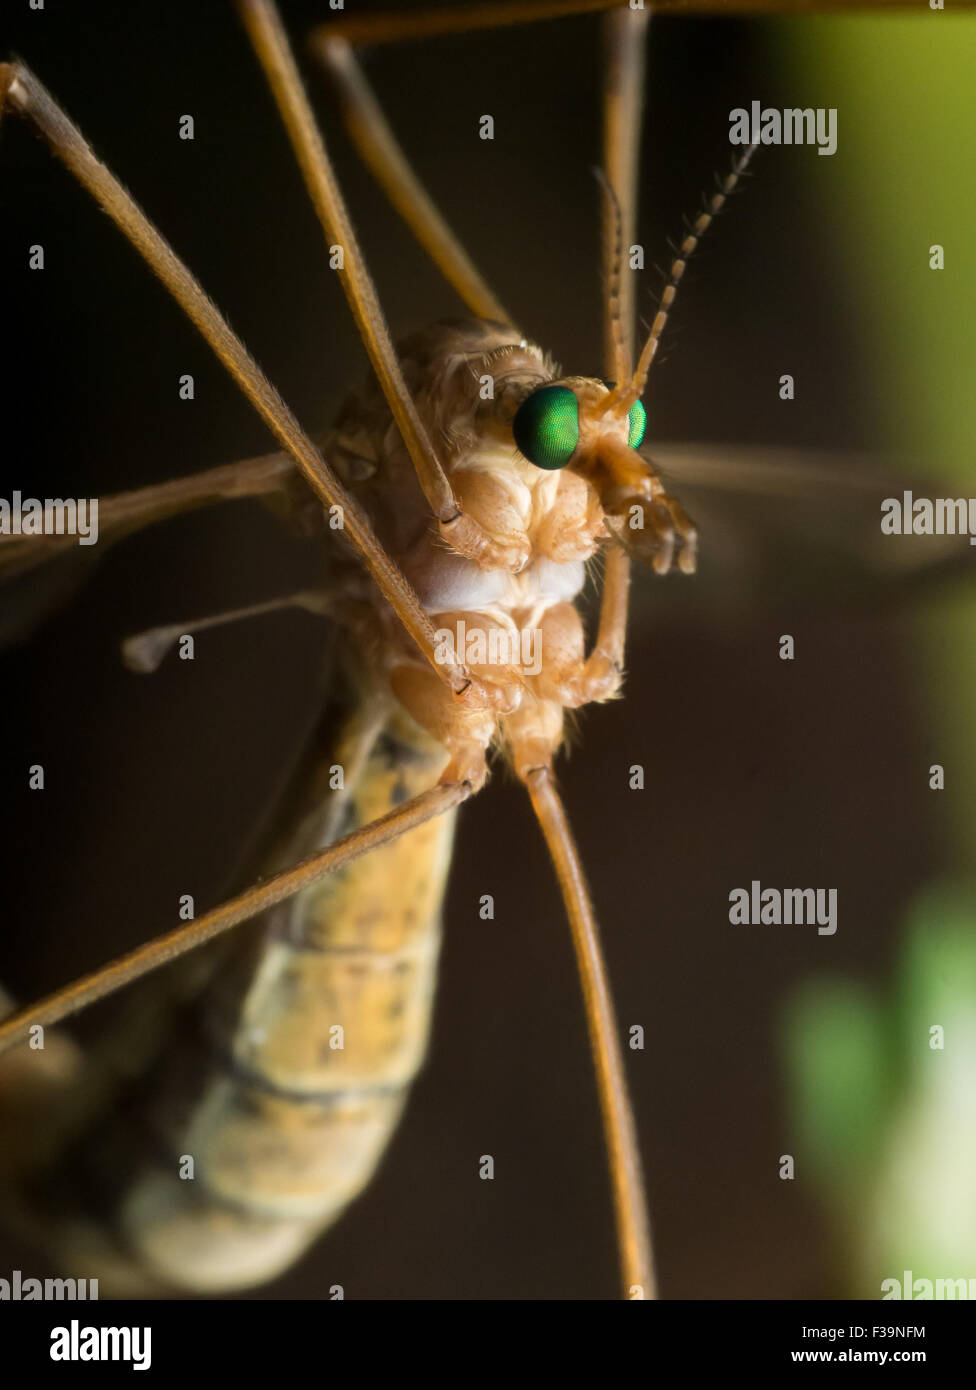 Crane Fly (Mosquito Hawk) with bright green eyes close up profile view Stock Photo